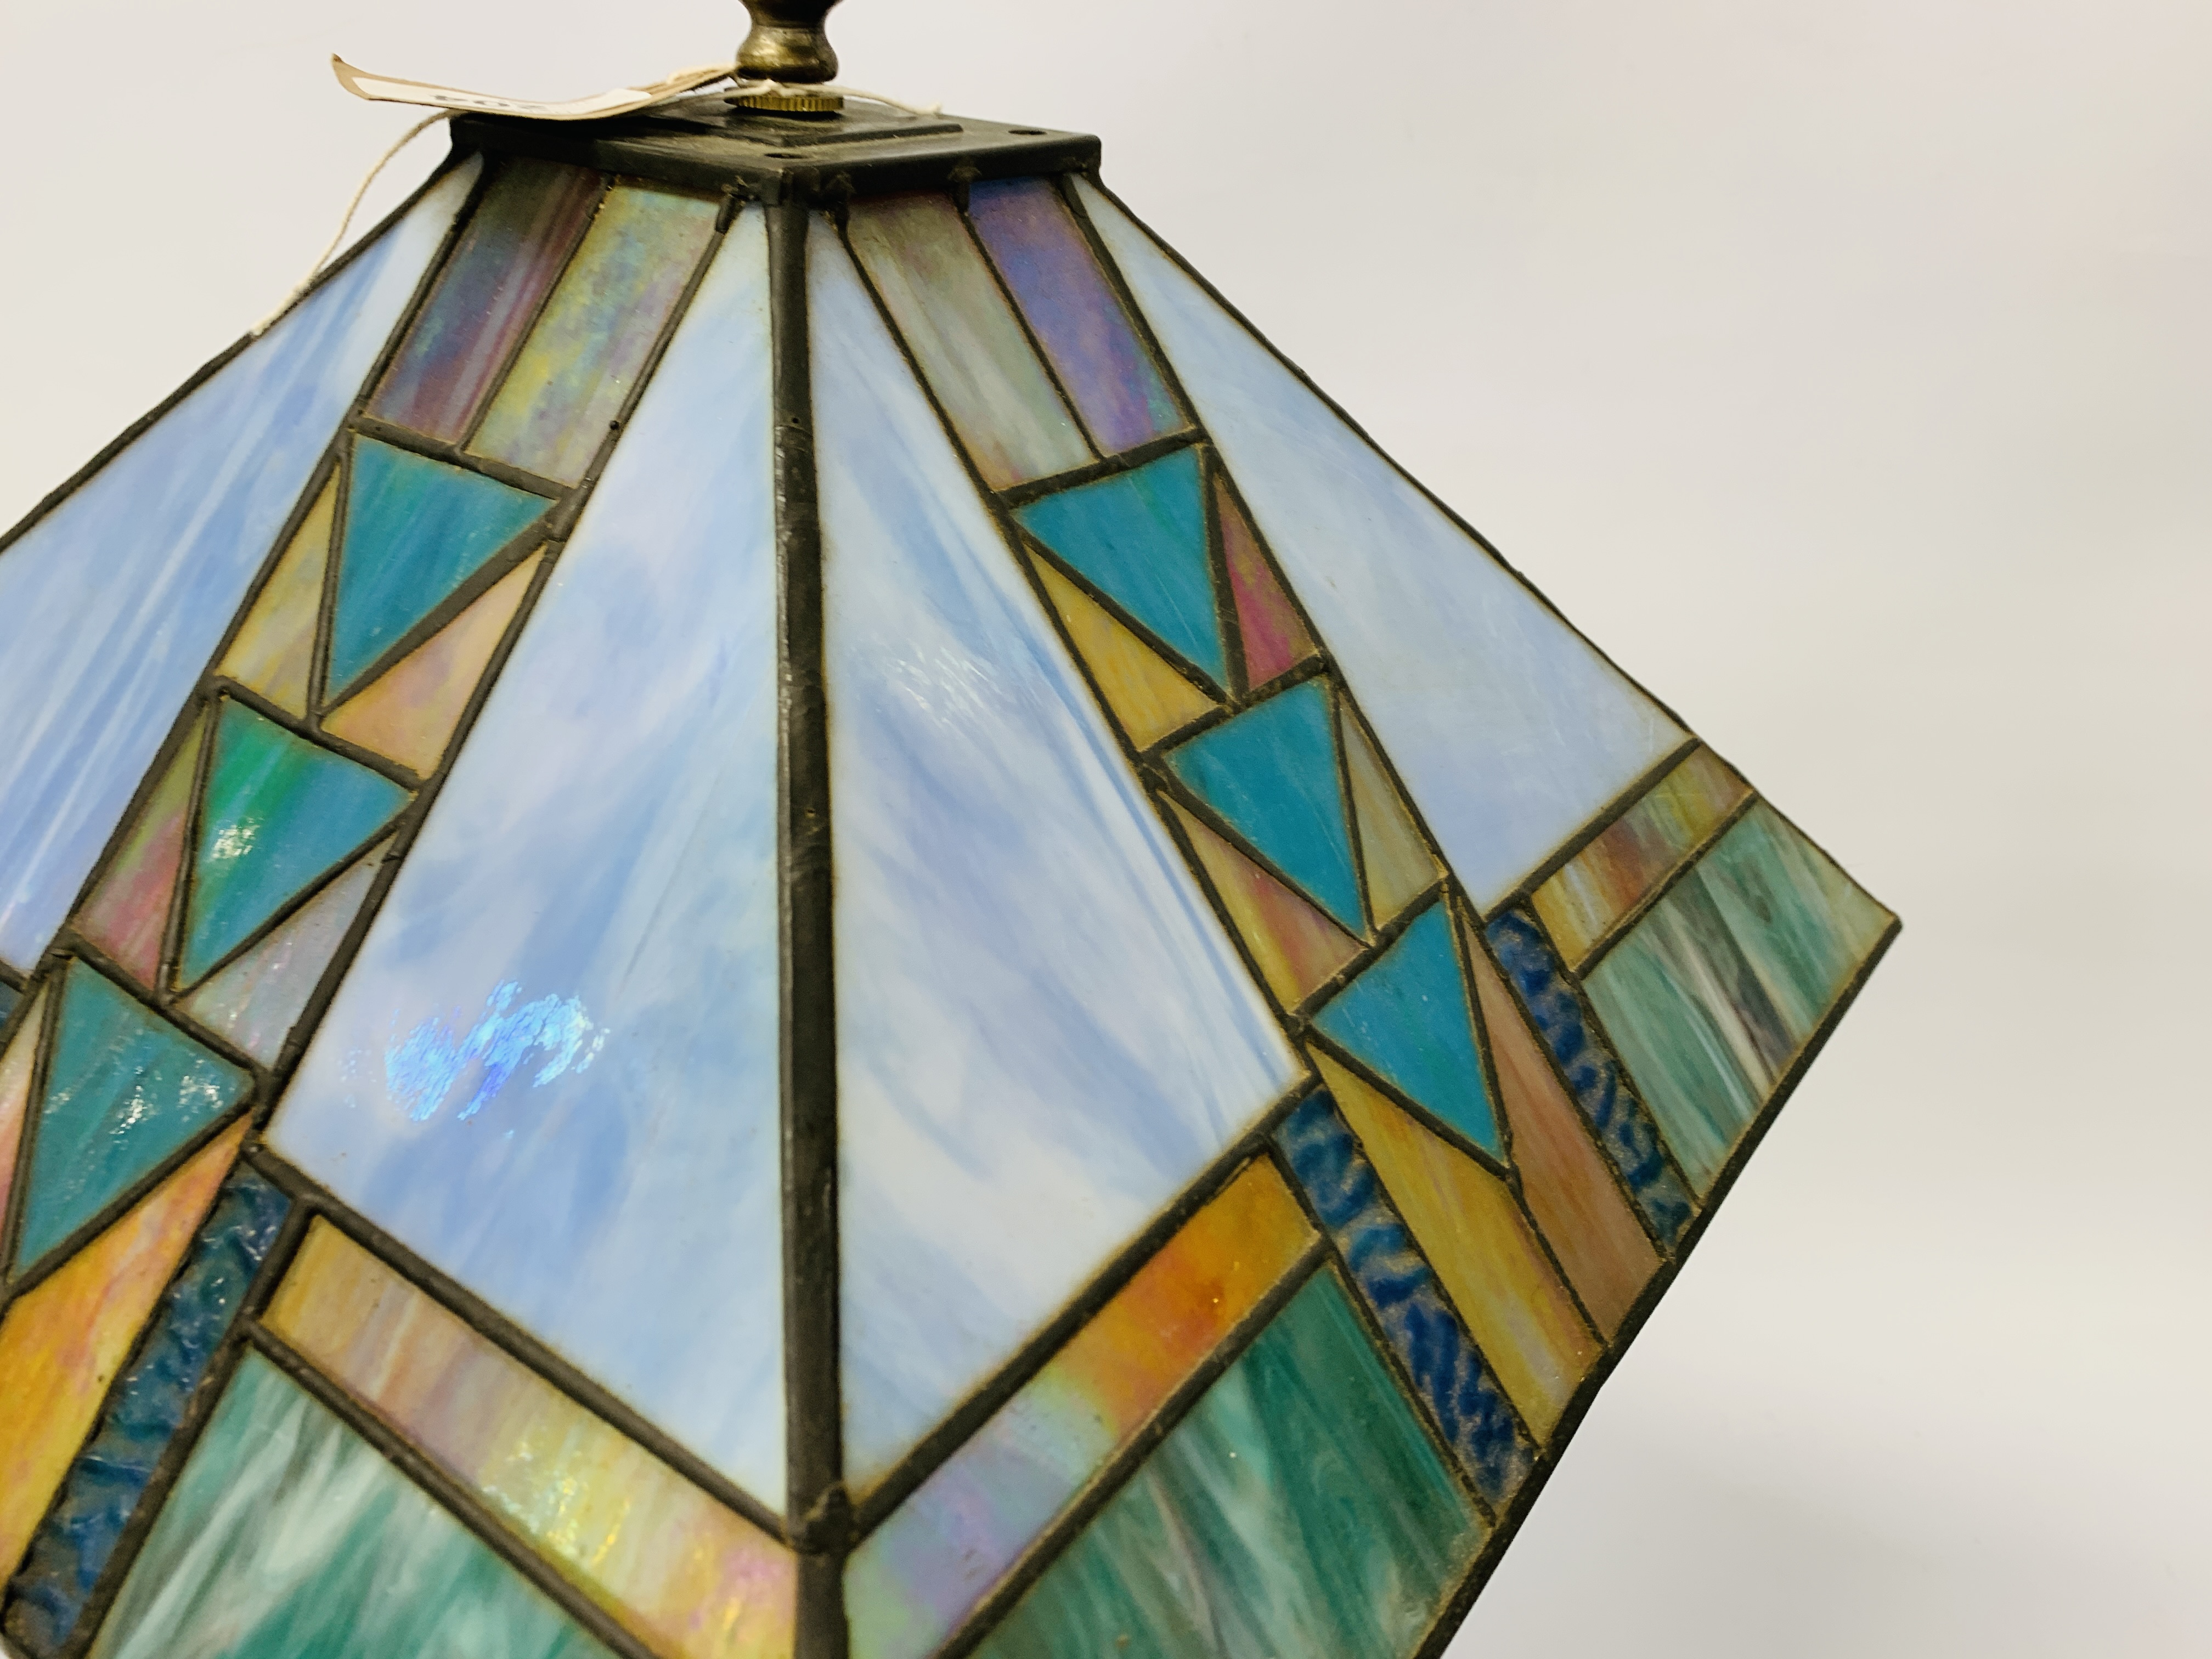 REPRODUCTION TIFFANY STYLE TABLE LAMP WITH SQUARE STAIN GLASS SHADE HEIGHT 50CM - SOLD AS SEEN. - Image 4 of 5